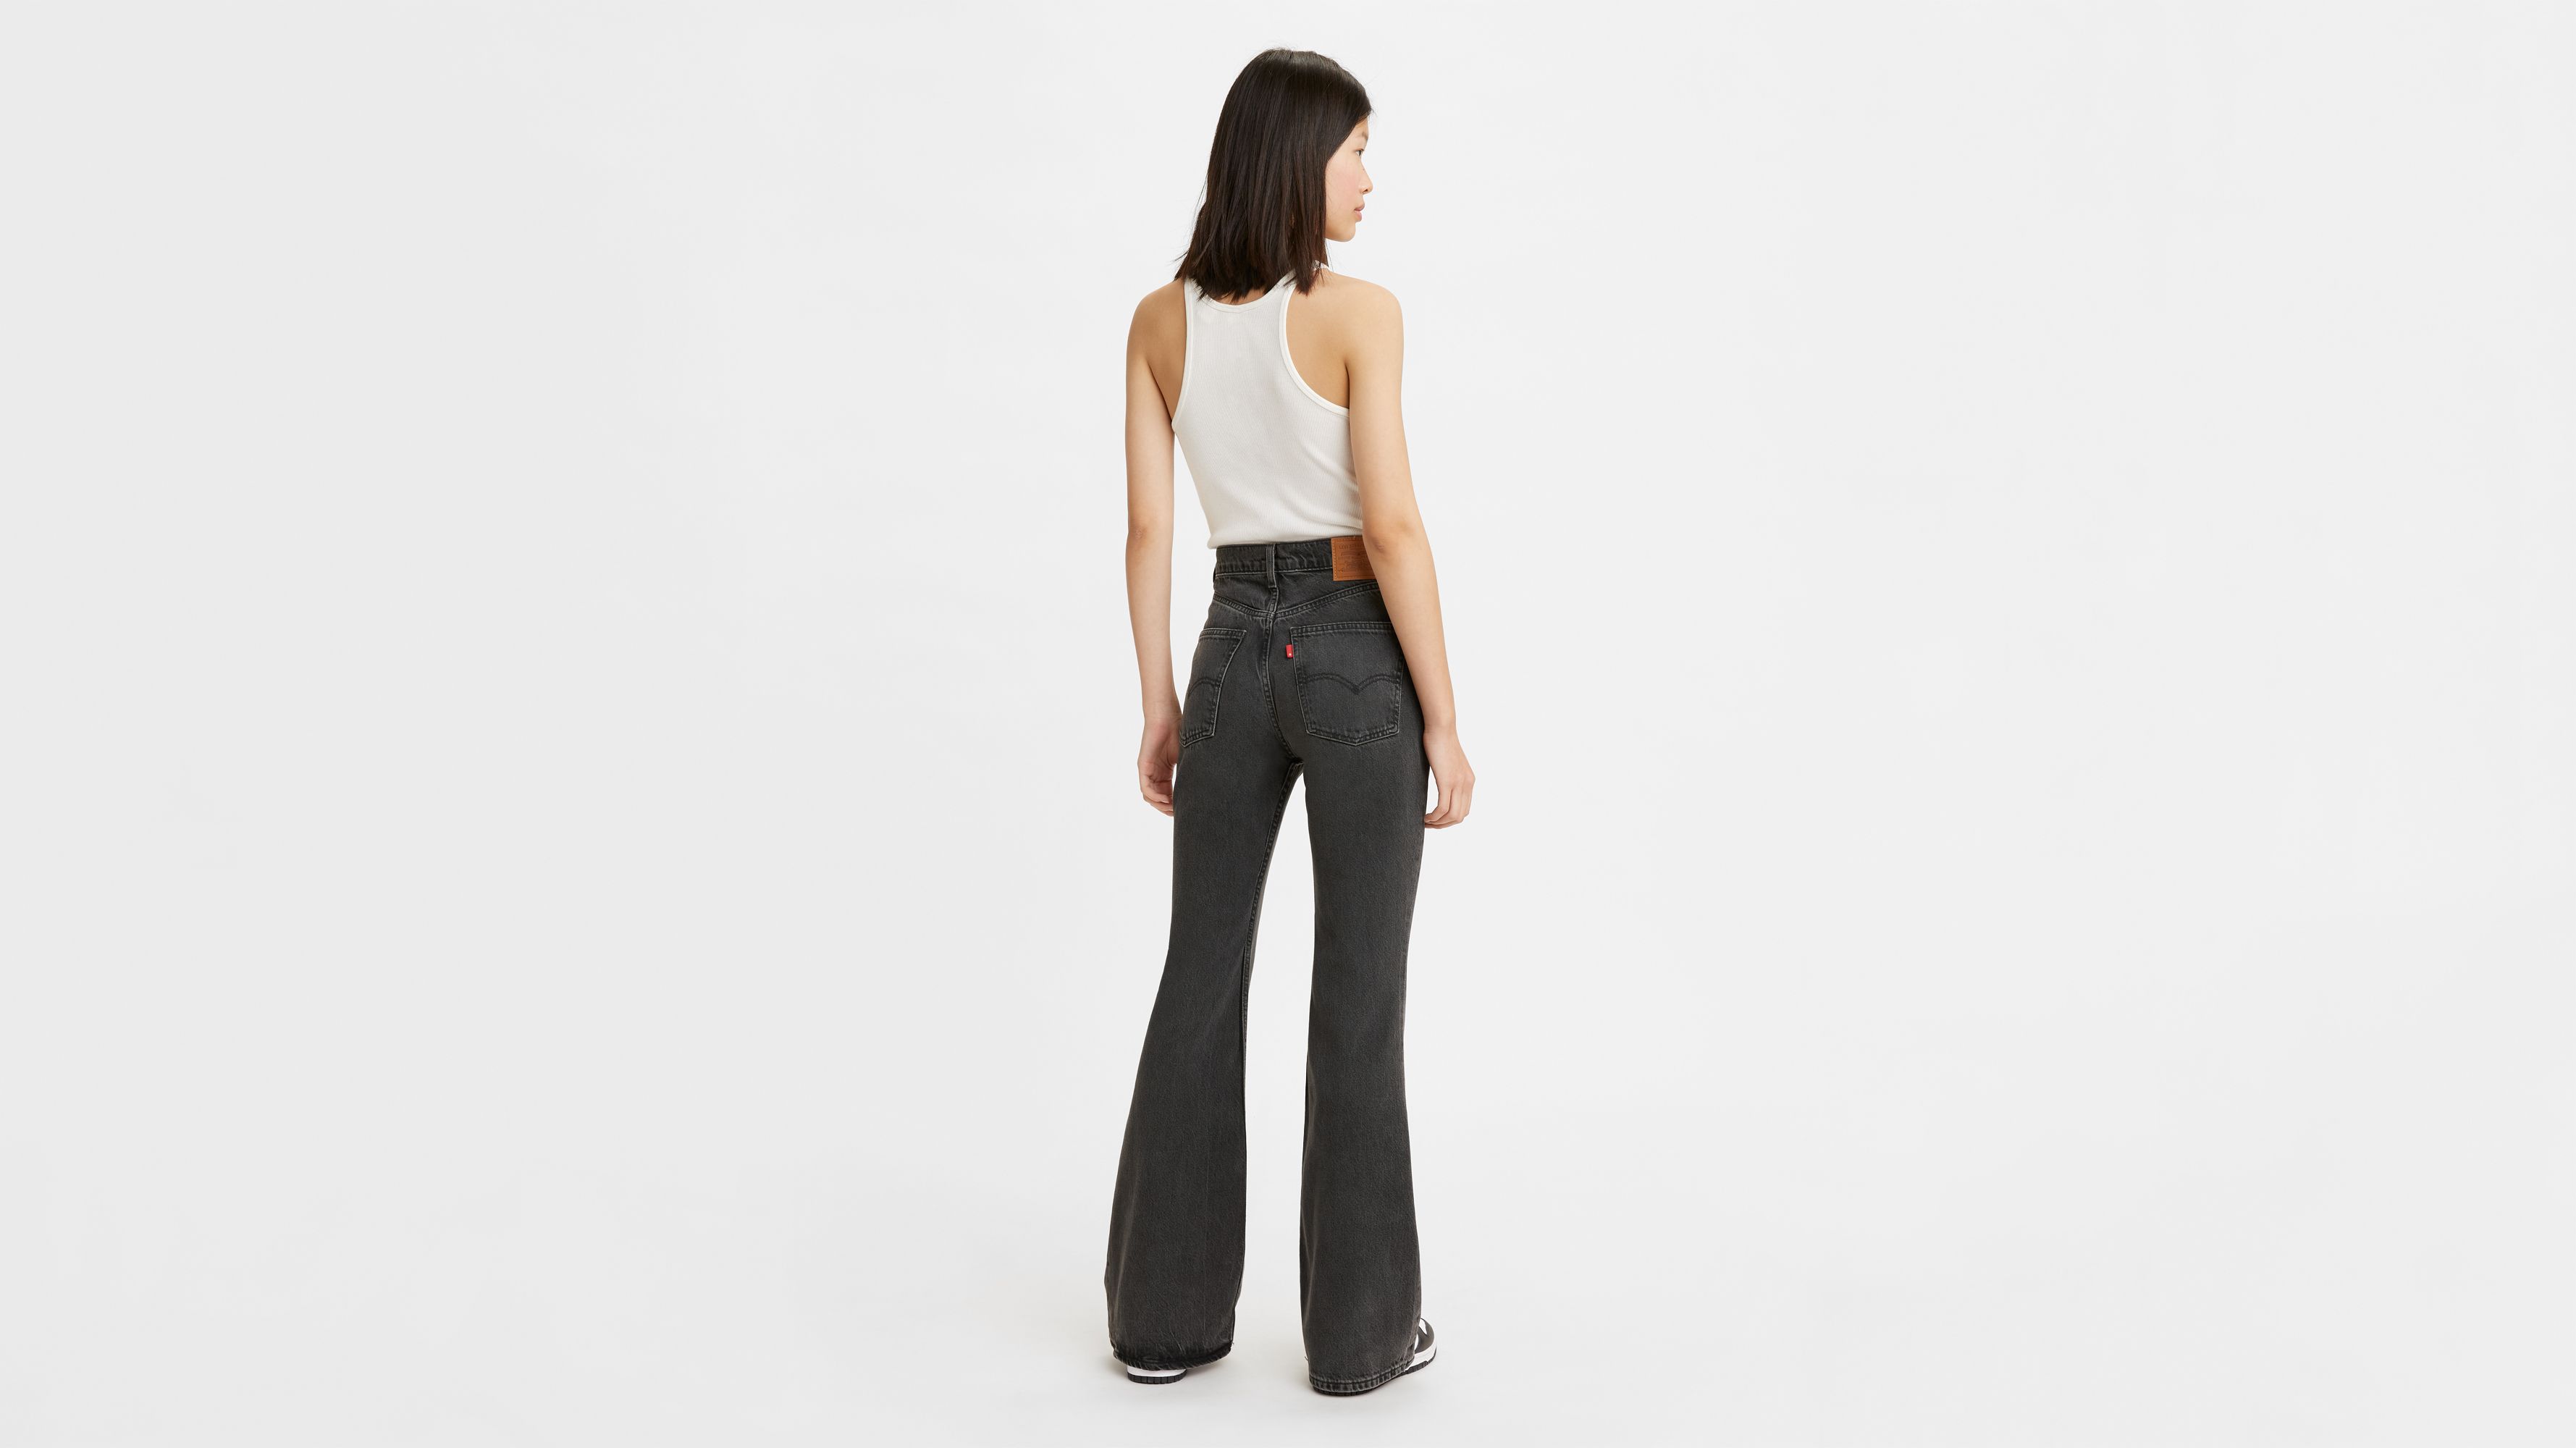 70s High Flare Washed Black High-Waisted Jeans